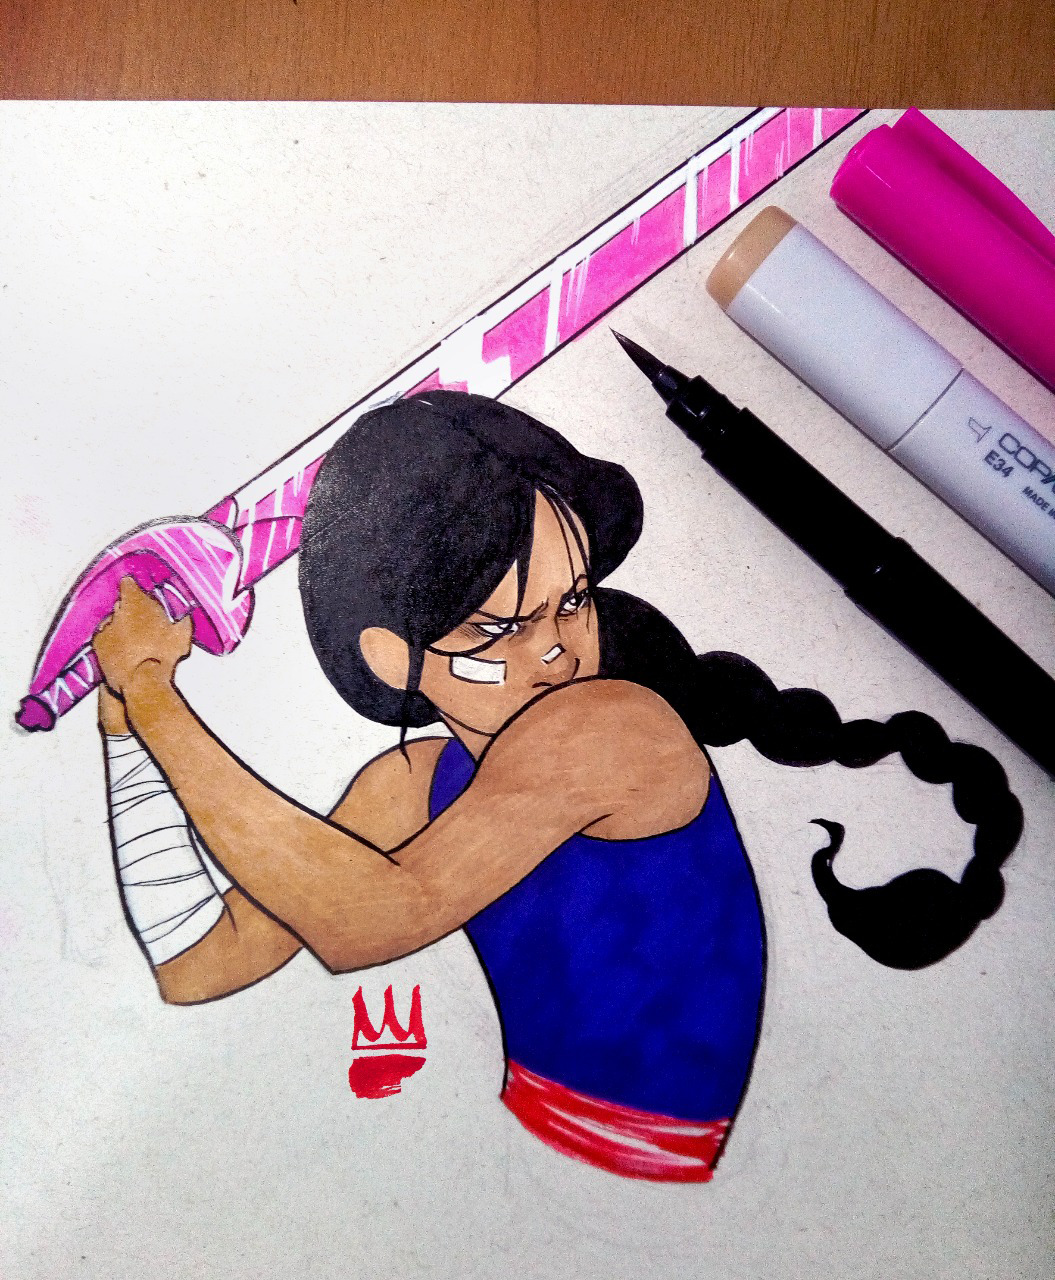 Day 14! Connie being badass as always! ~Sorry I posted this kinda late guys, I was on a trip >